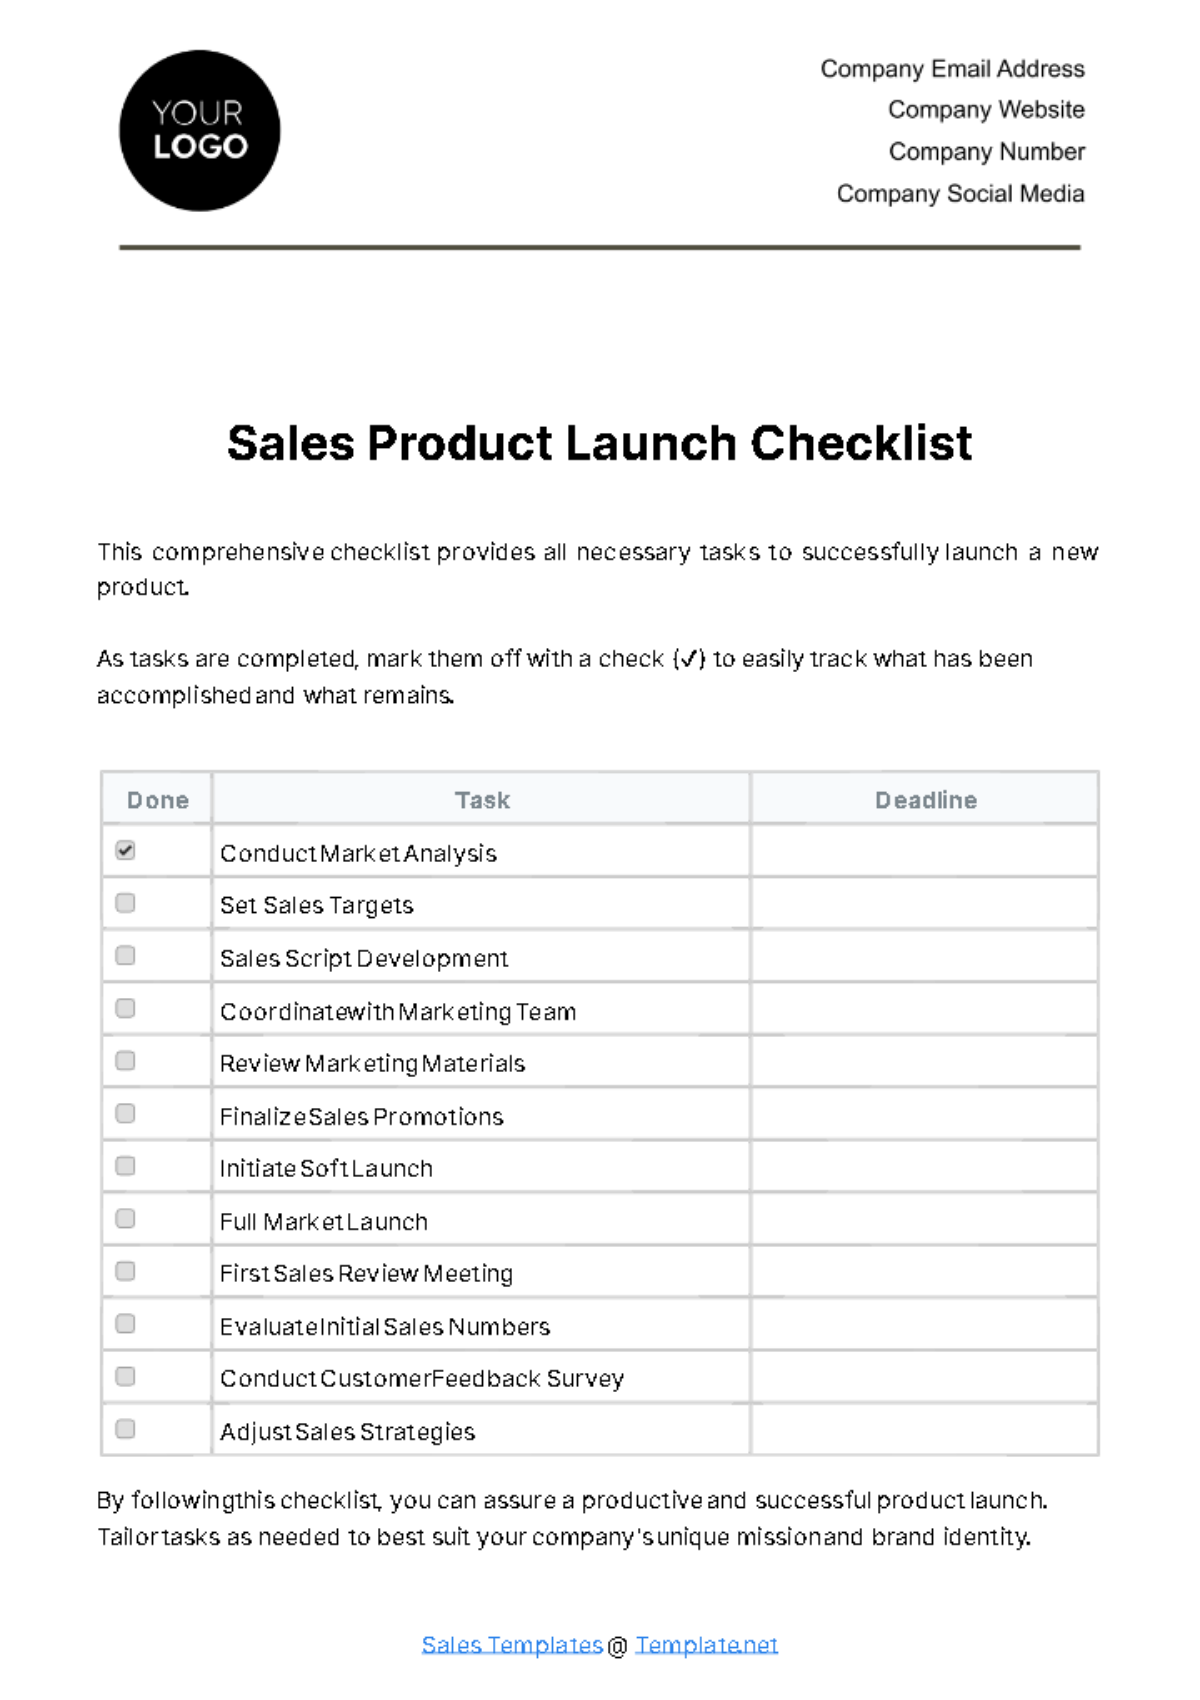 Sales Product Launch Checklist Template